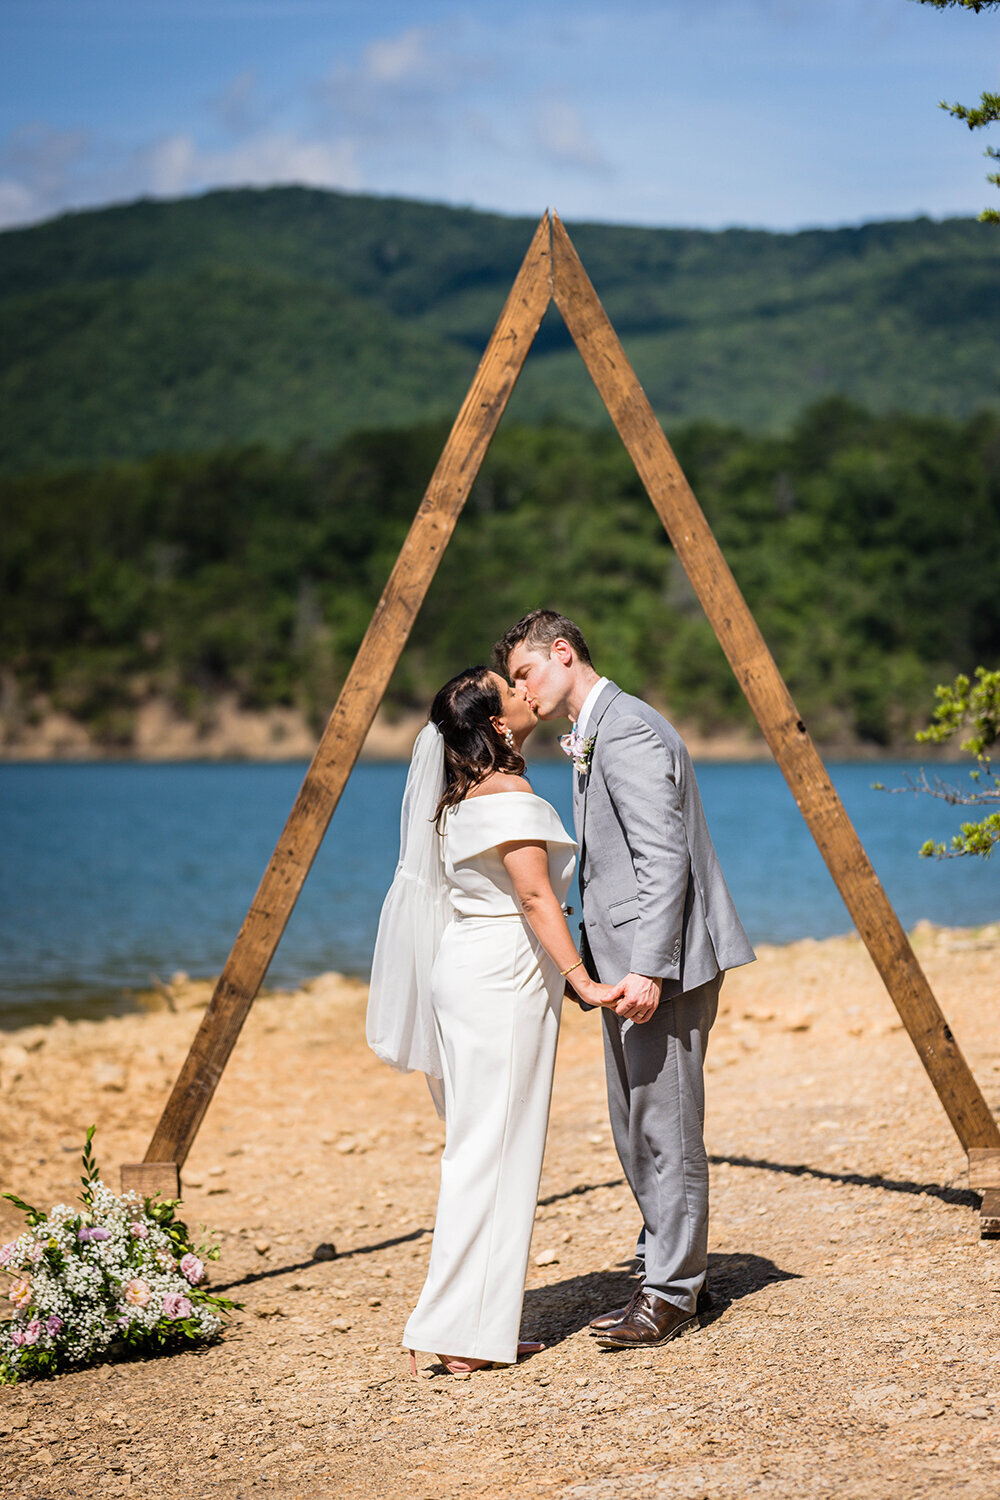 Two marriers go in for a first kiss under a triangle arch on Carvin’s Cove in Roanoke, Virginia.